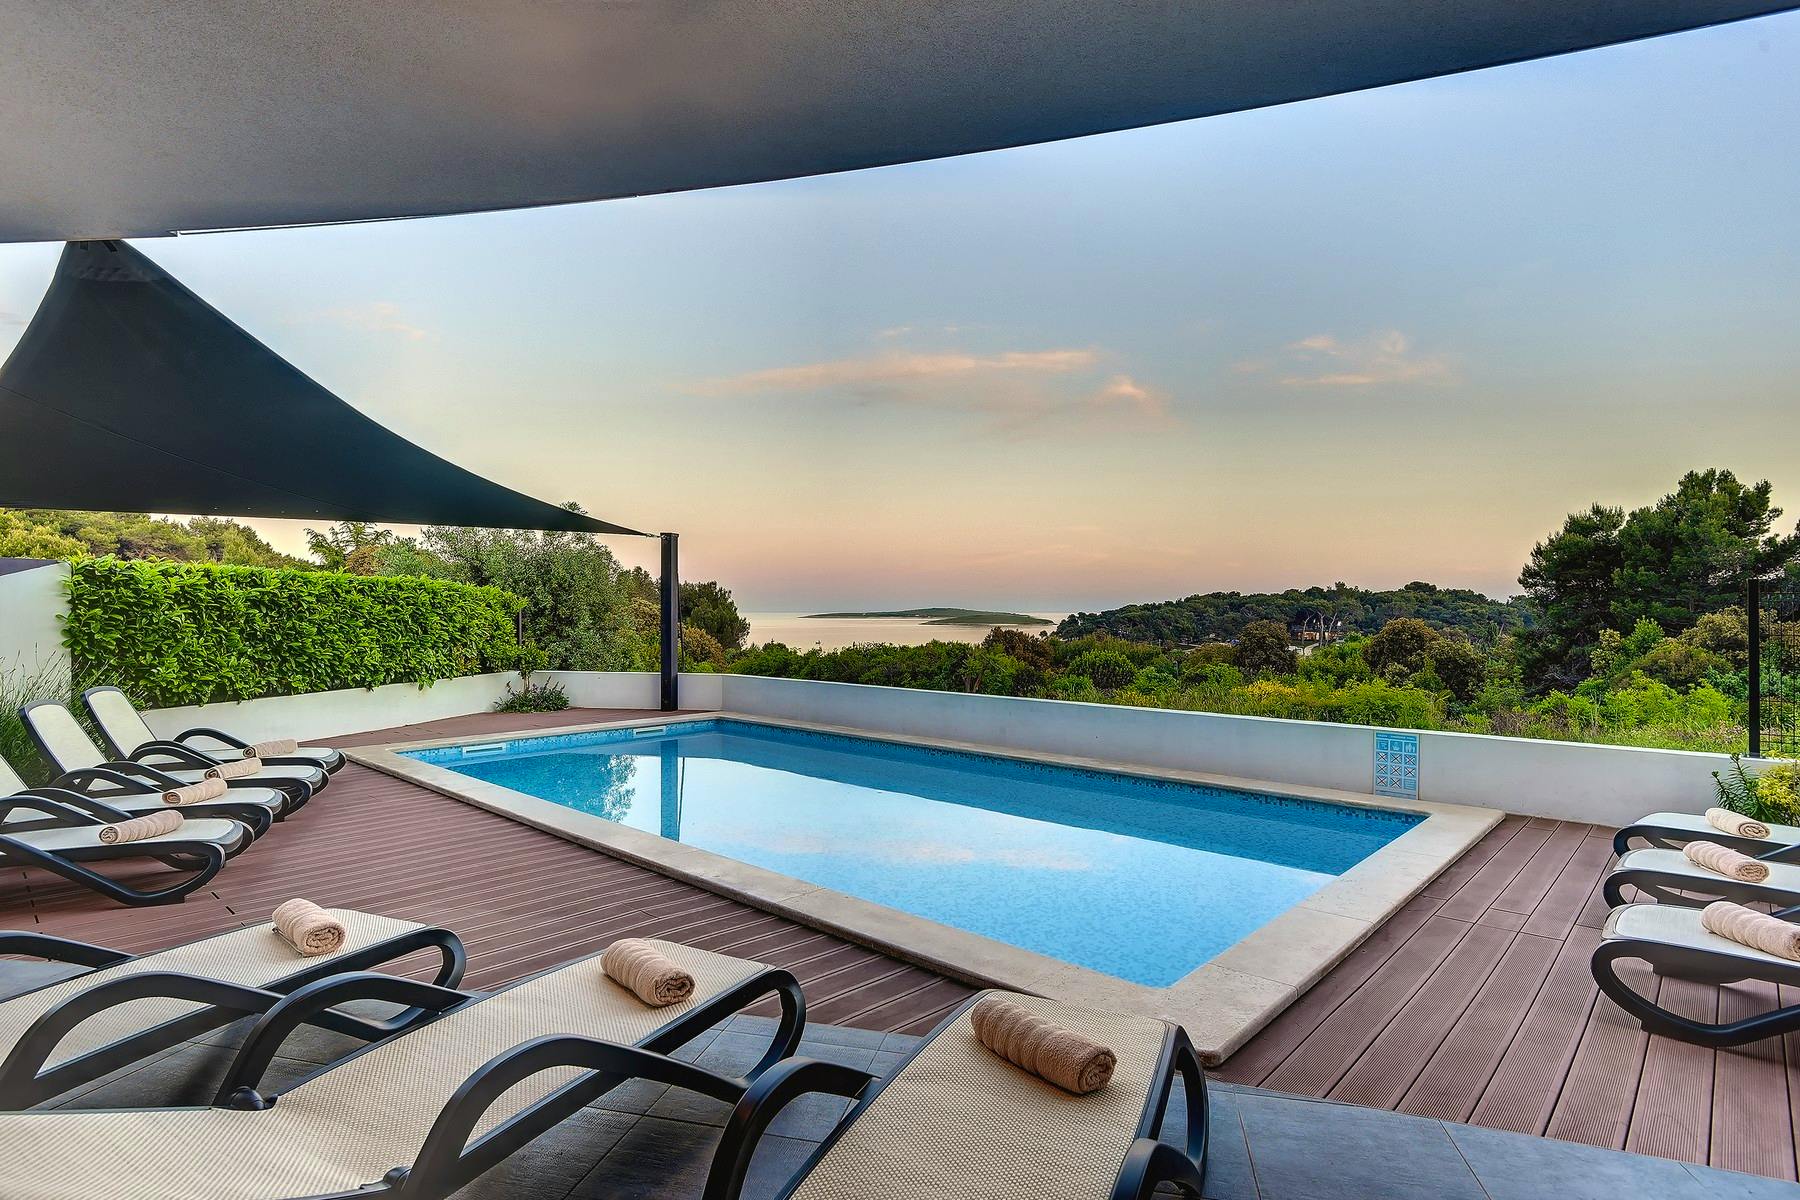 Stunning view from the terrace with swimming pool